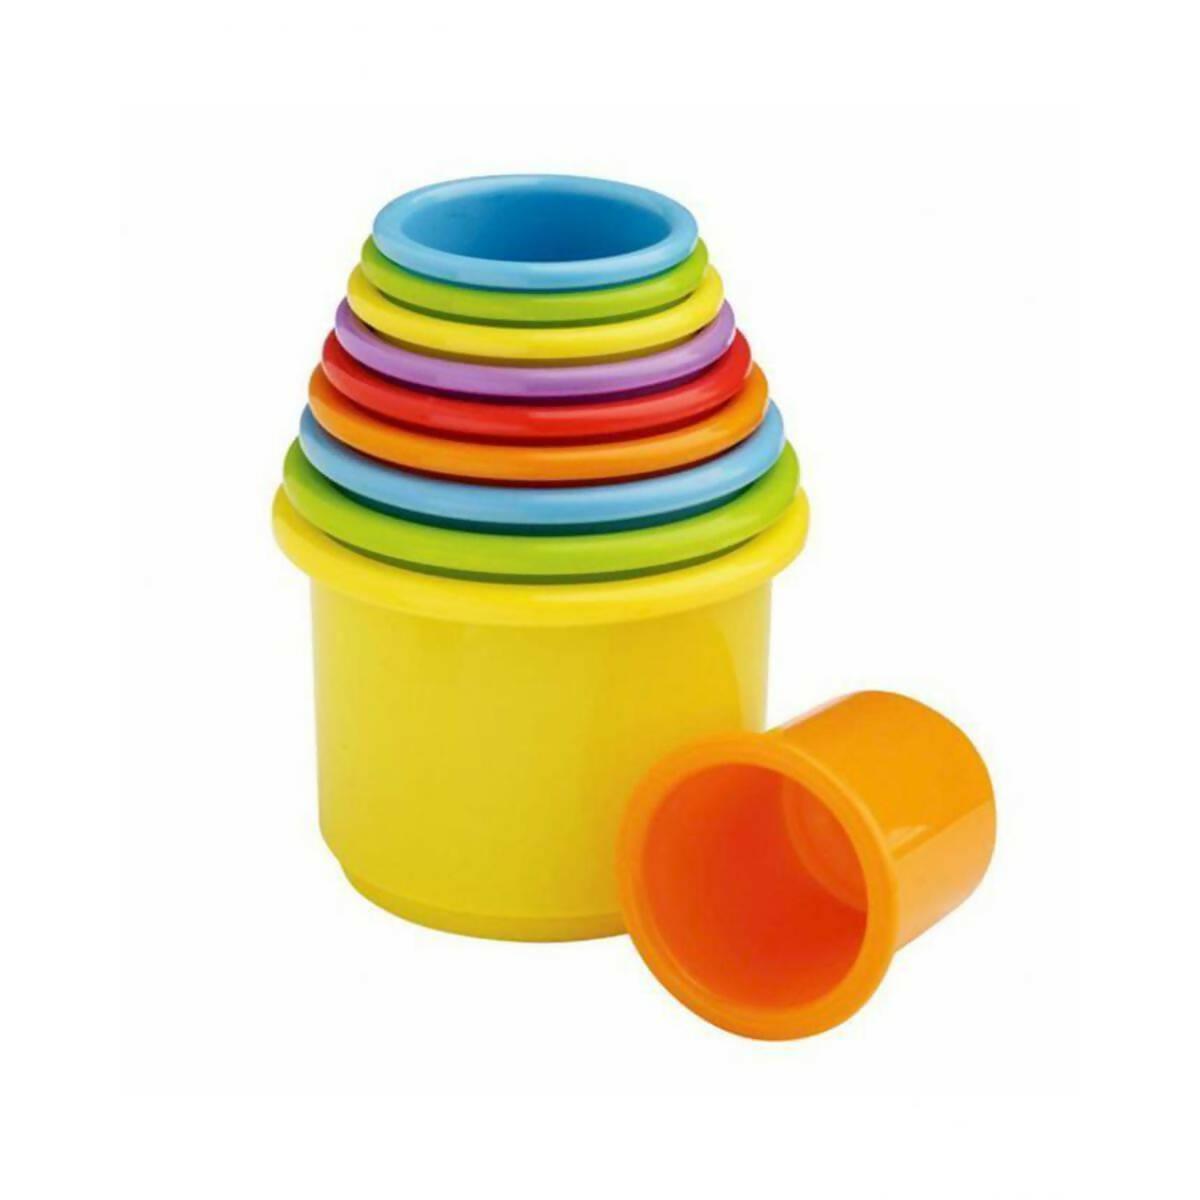 Colorful Stacking Cups